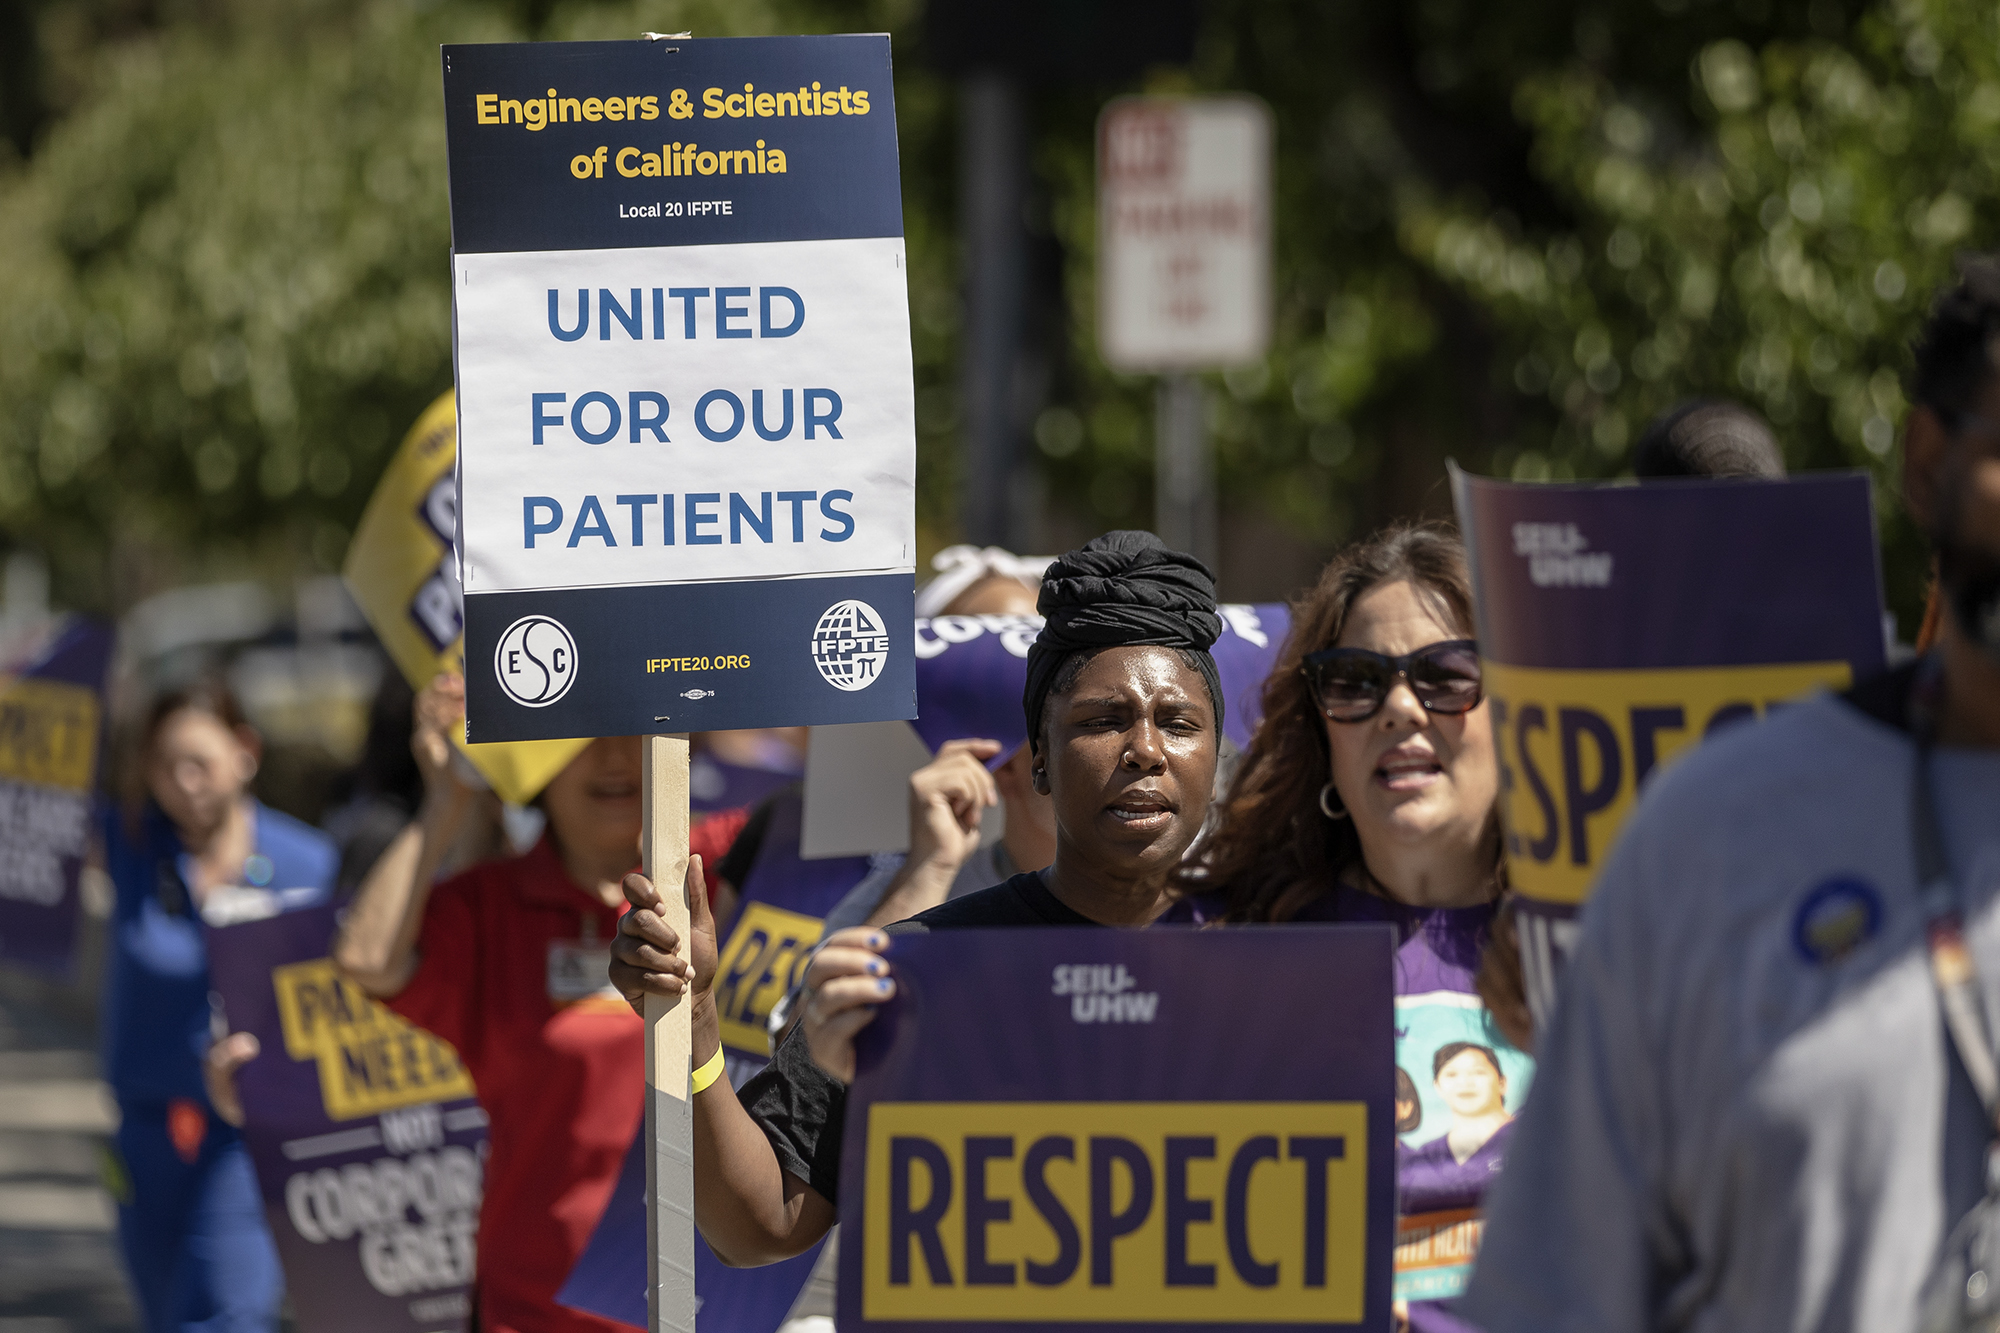 Health Care workers hold signs that read, "Engineers & Scientists of California United for Our Patients."